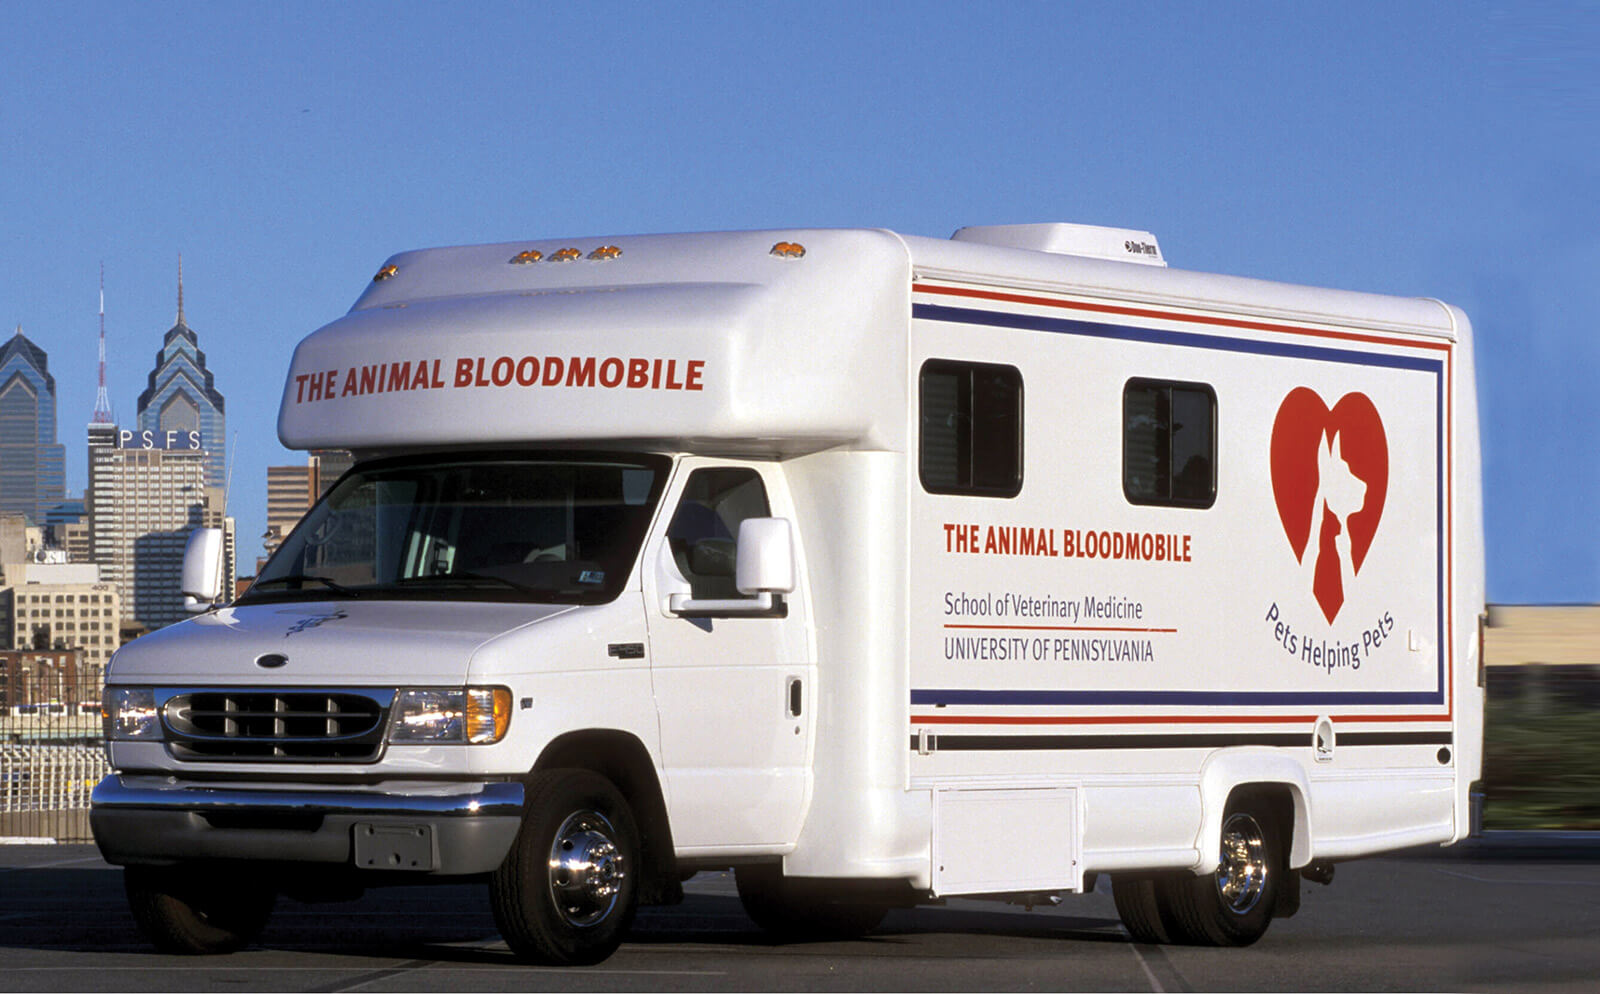 A photograph of “The Animal Bloodmobile,” a truck functioning as the only mobile service for canine blood banking in the country, operated by the veterinary school at the University of Pennsylvania.